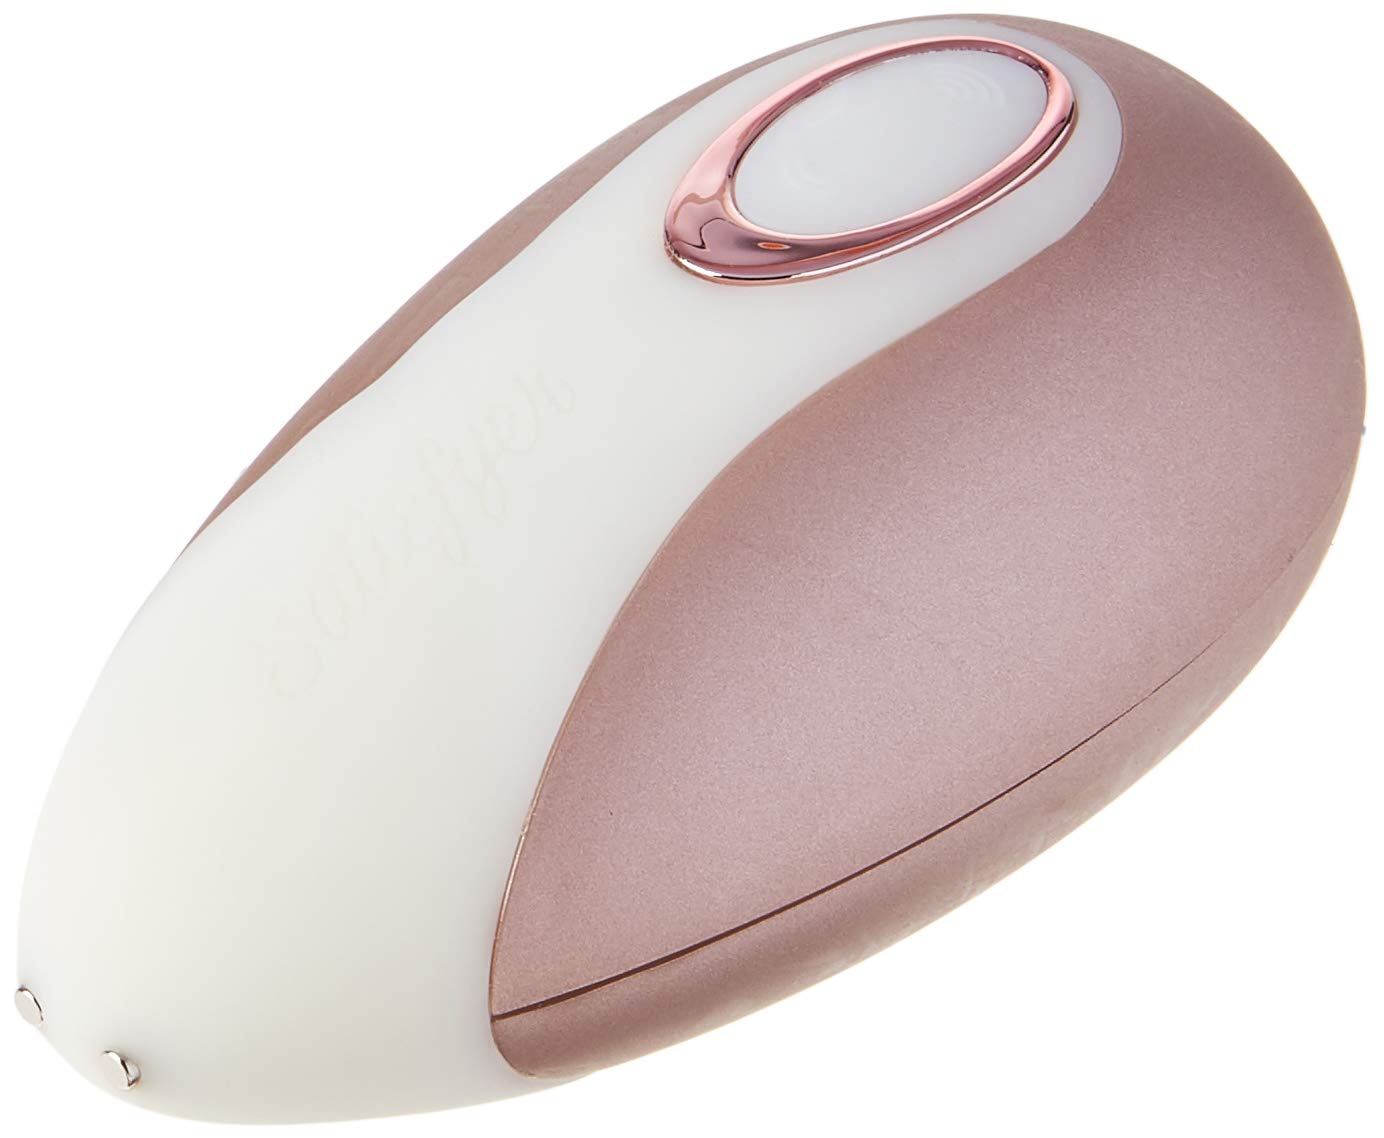 Photo of the Satisfyer Pro Deluxe Next Generation Air-Pulse Stimulator for Women